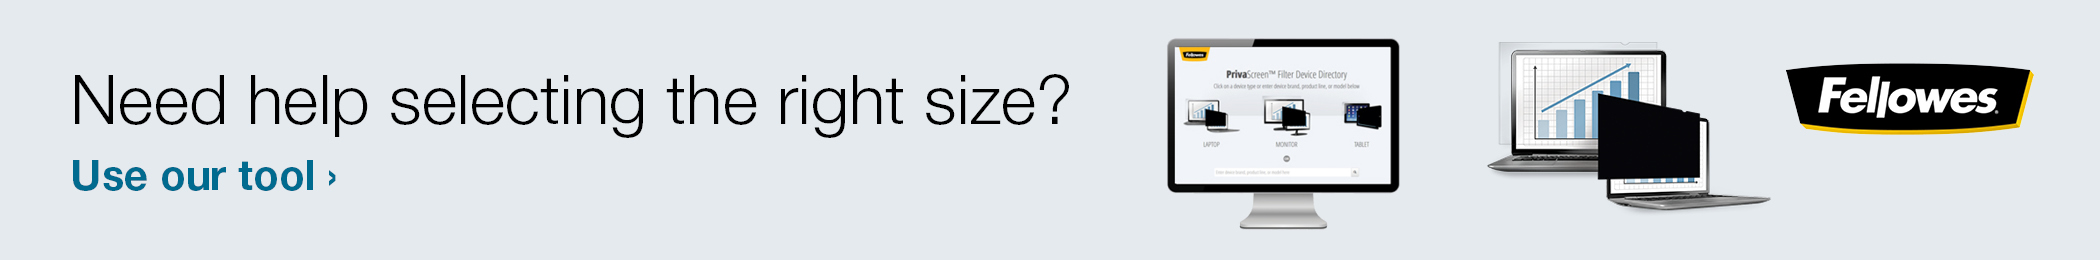 Need help selecting the right size?